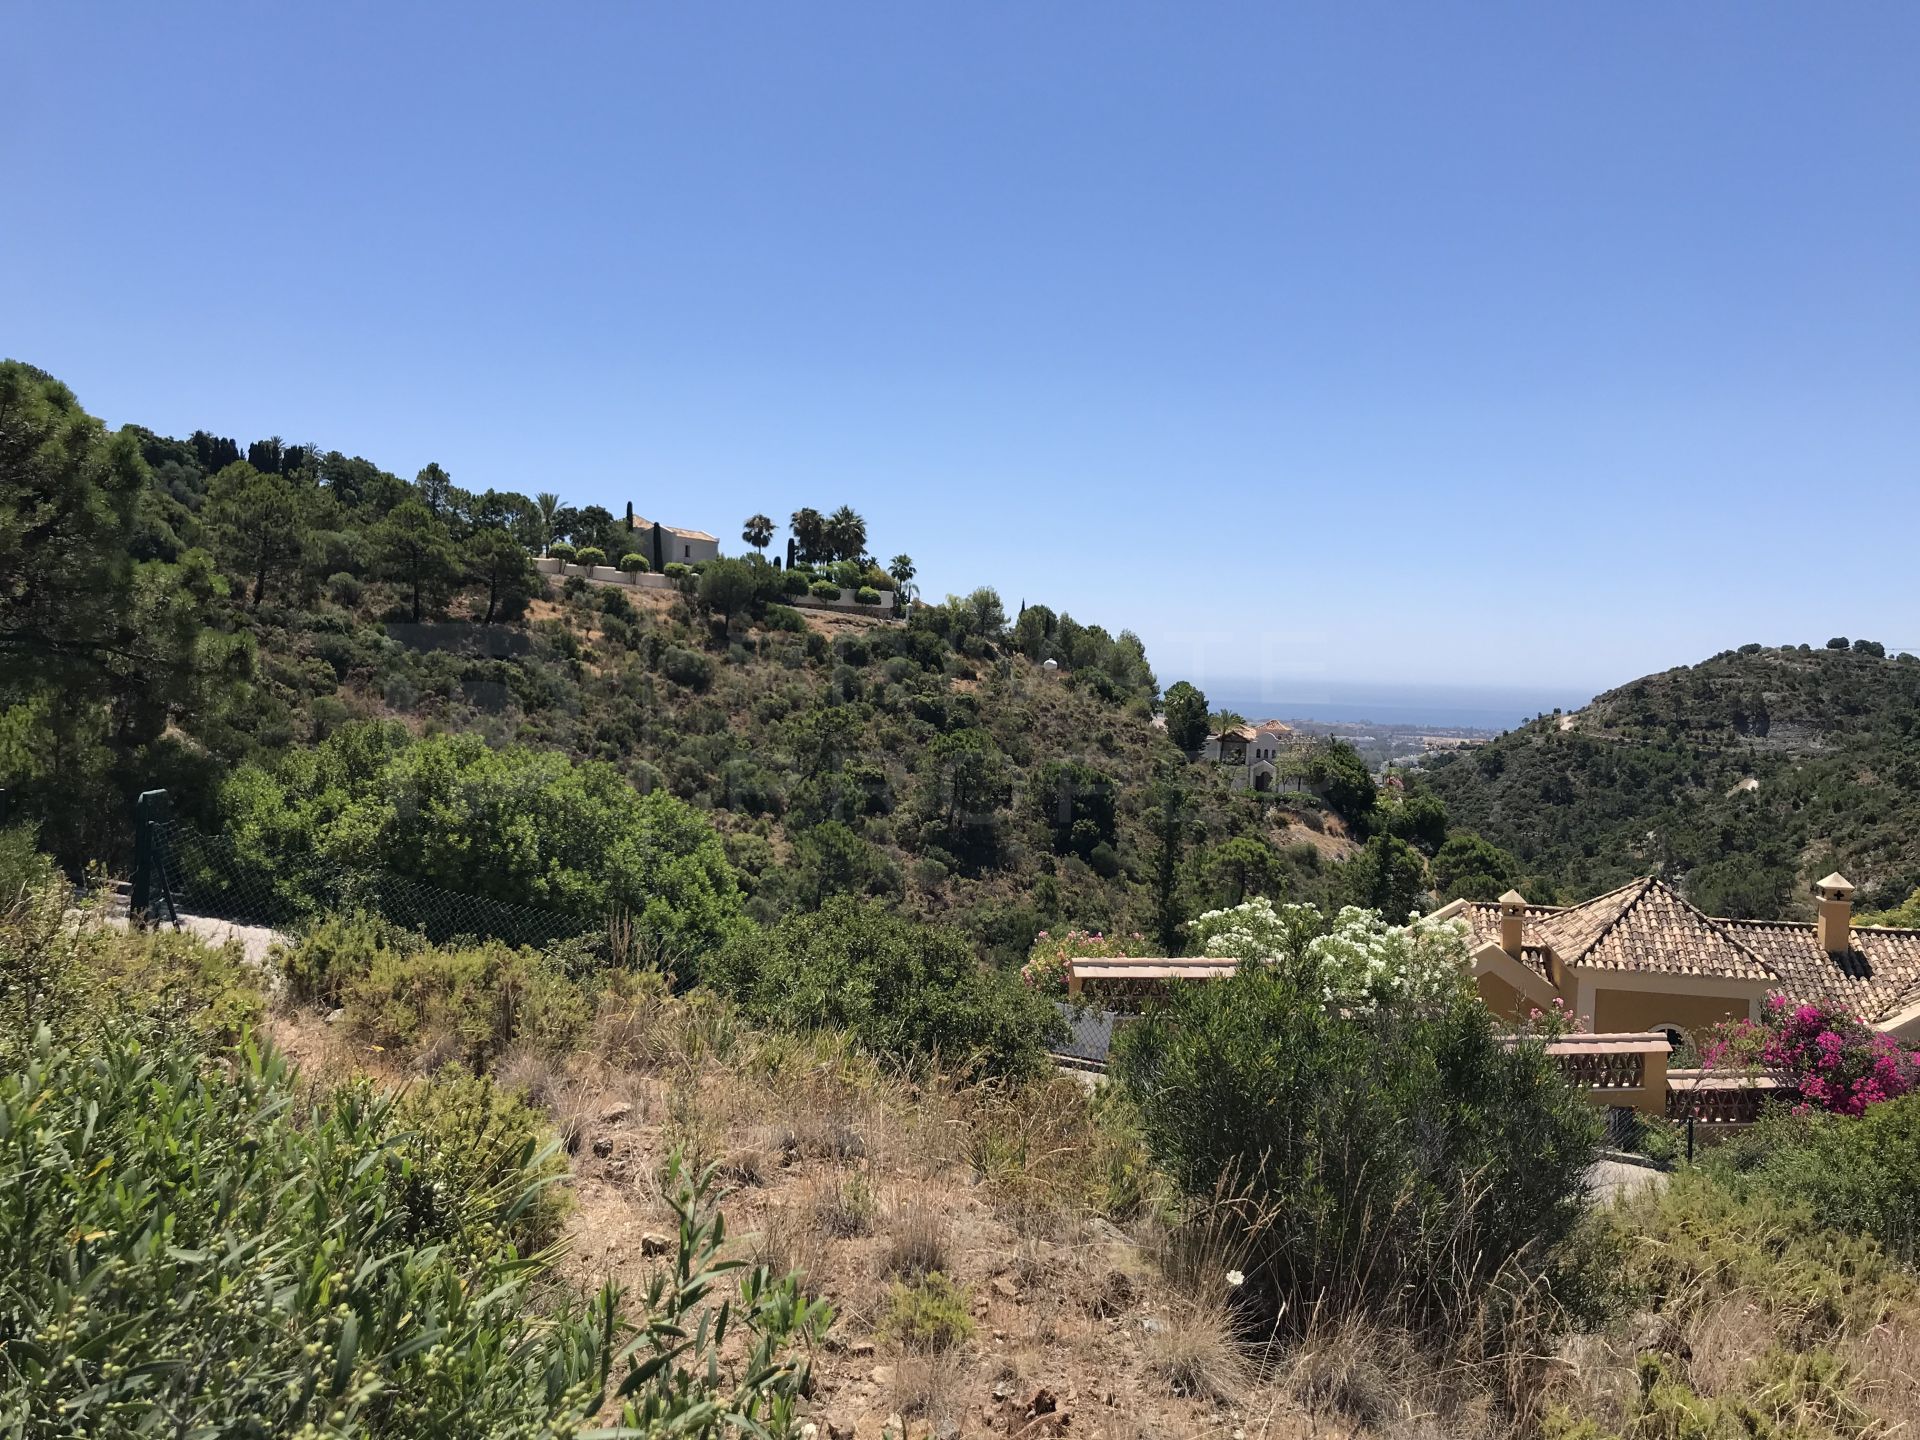 Sea and mountain views in El Madroñal